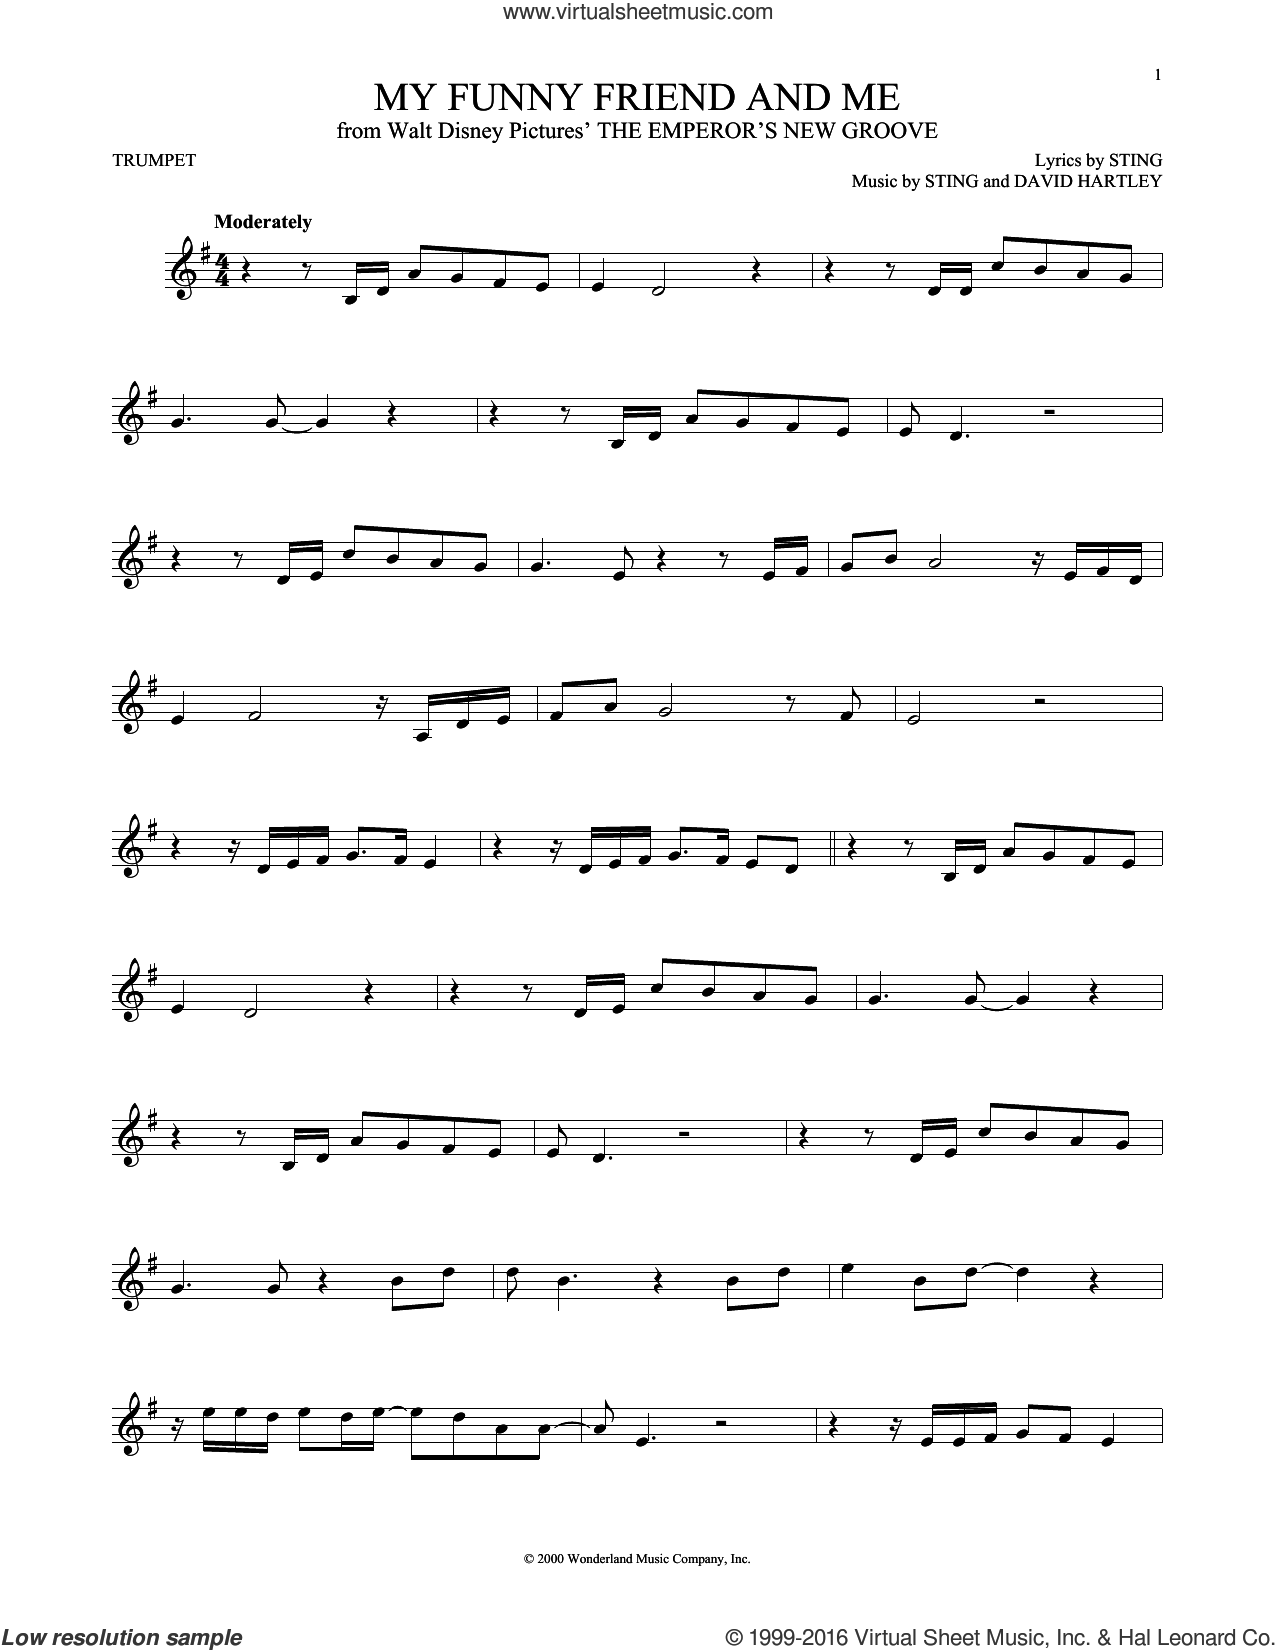 My Funny Friend And Me (from The Emperor's New Groove) sheet music for  trumpet solo